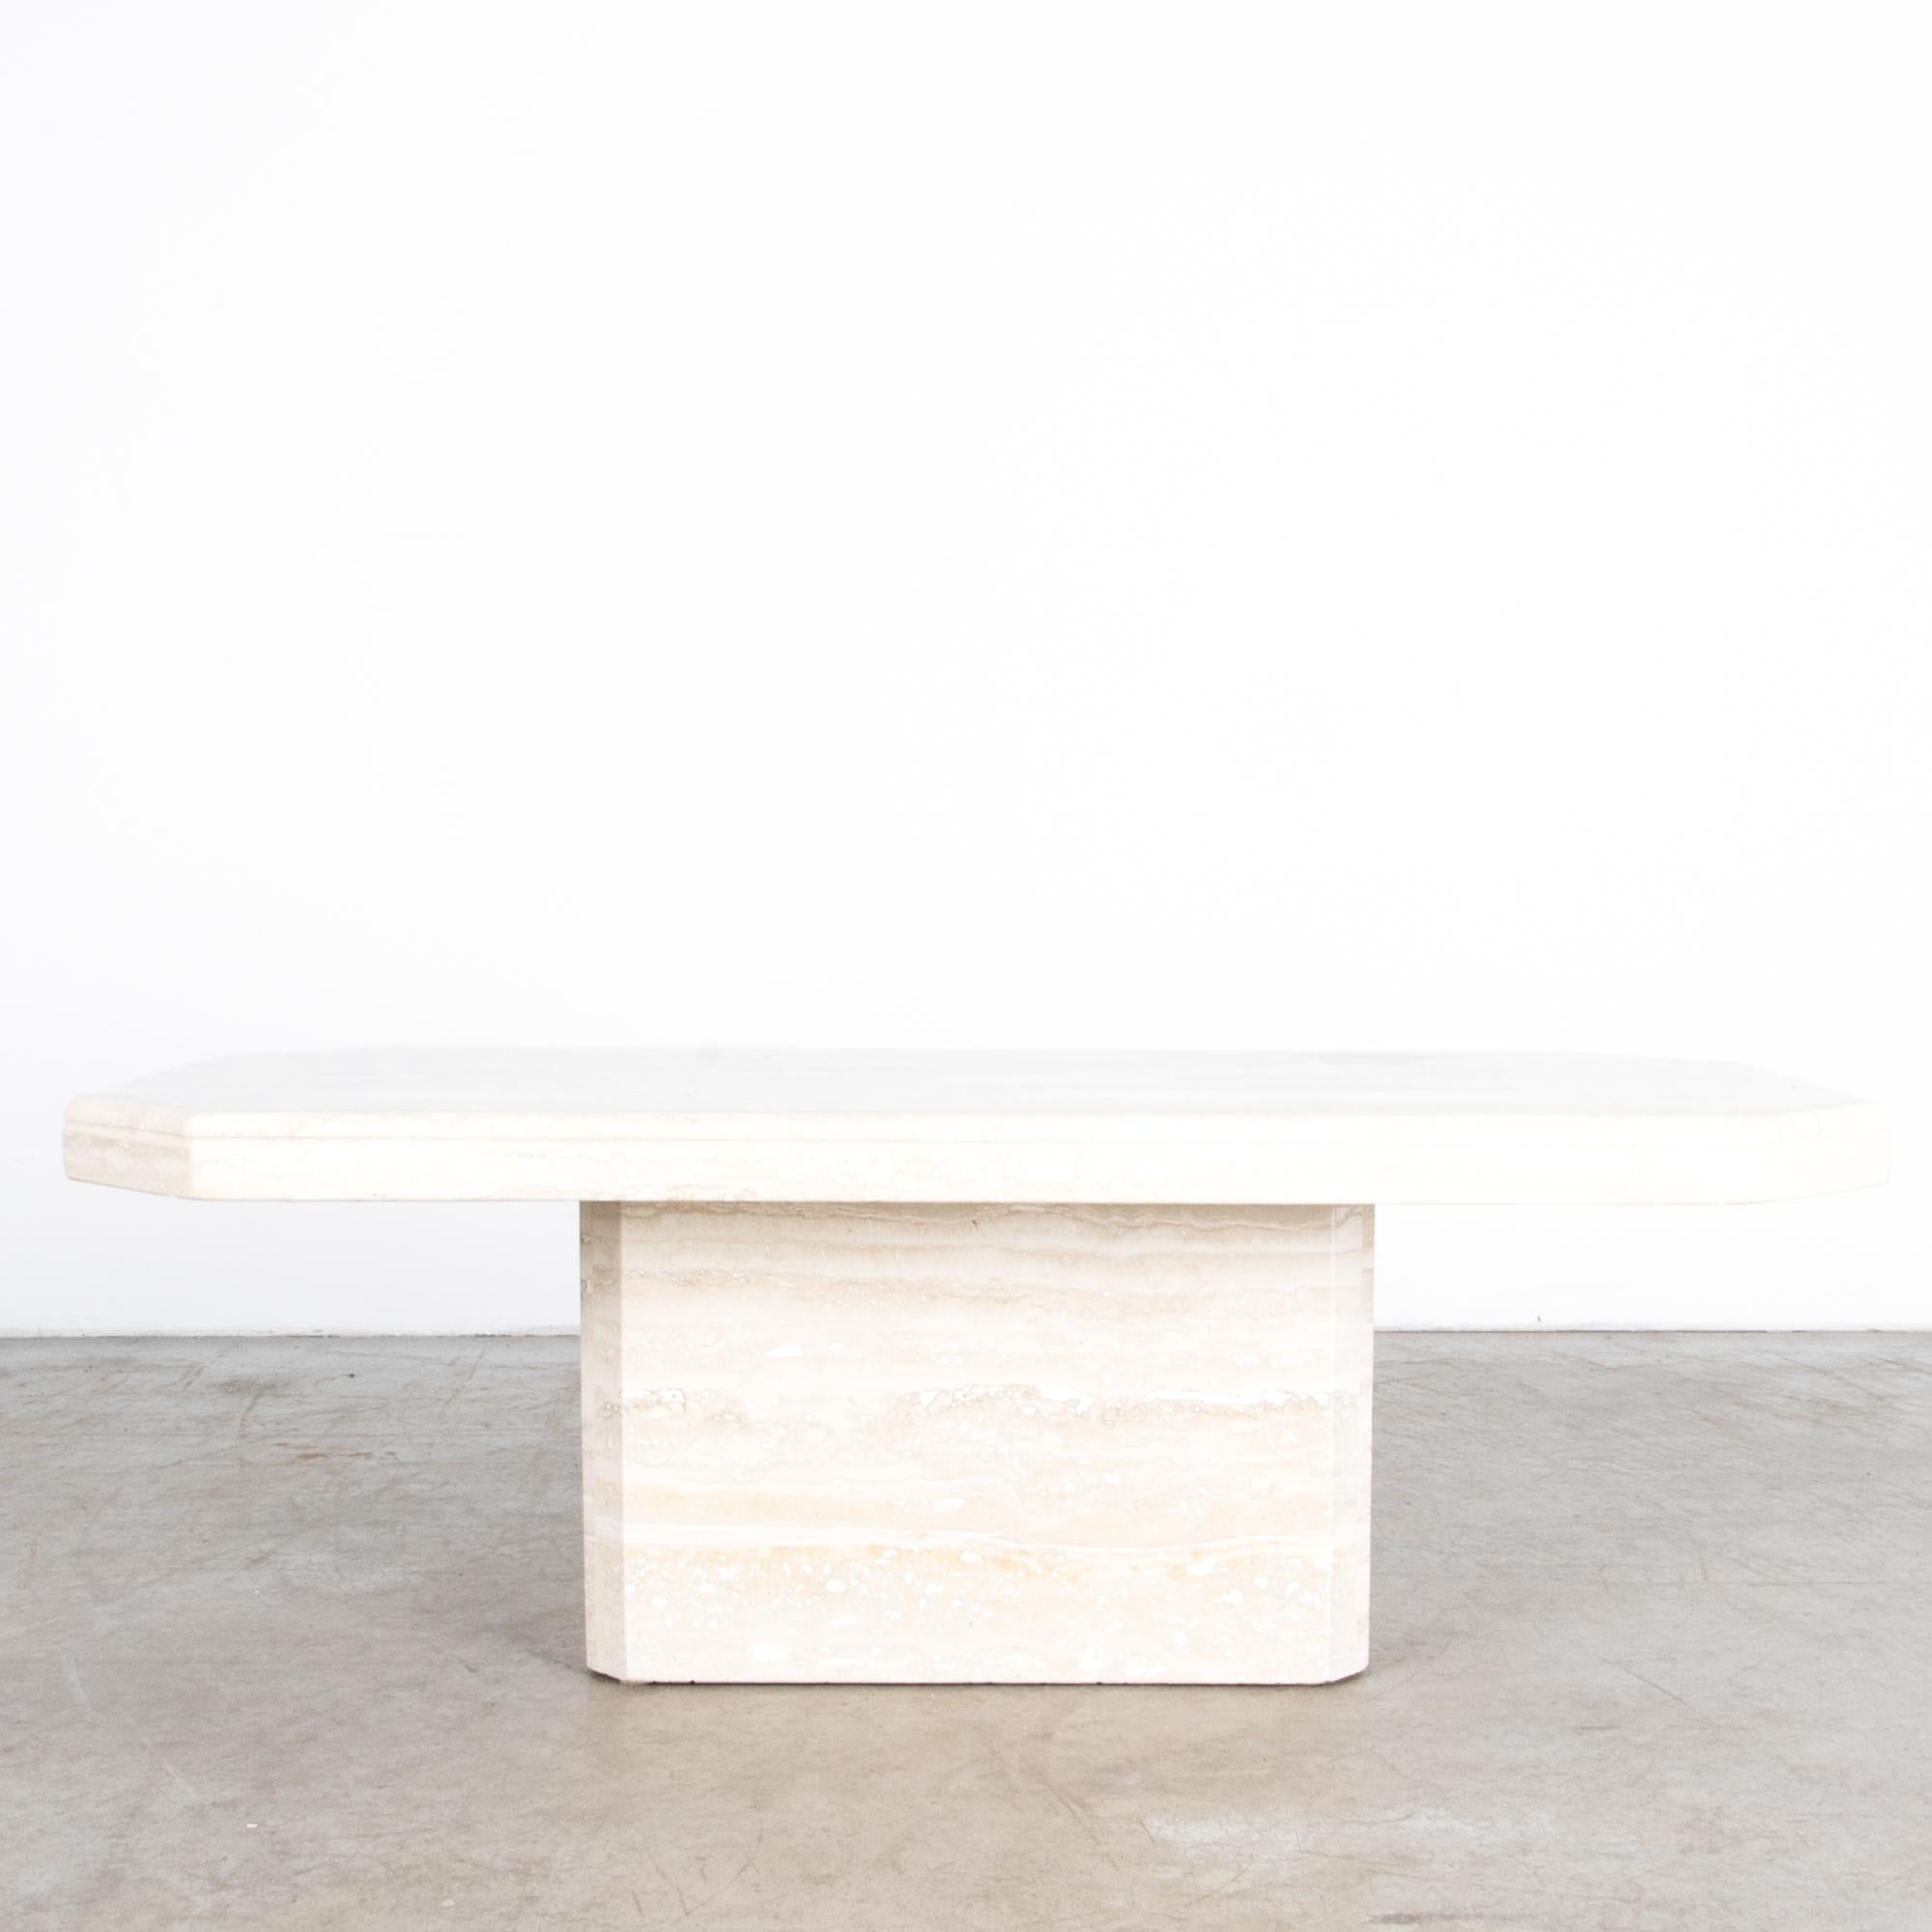 A travertine coffee table from Italy, circa 1970, the height of Italian ‘Bel design’. Modernist luxury meets perfect simplicity in this piece, made from a simple arrangement of Italian travertine: a hexagonal tabletop sitting atop a beveled block of